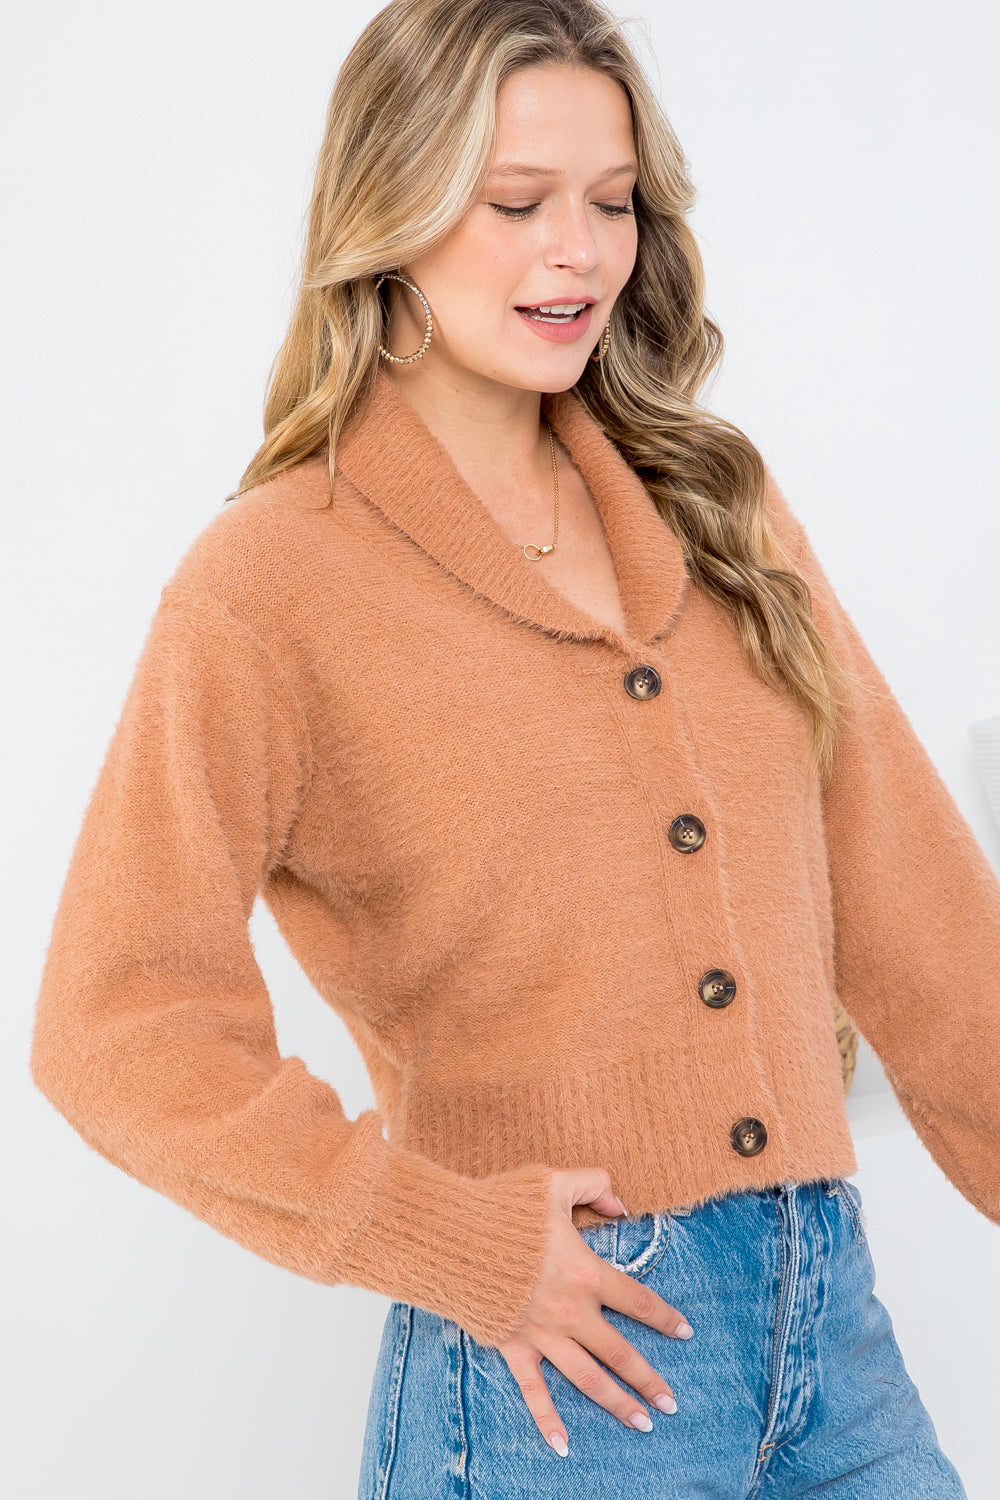 Shawl Collar Long Sleeve Buttoned Sweater Jacket